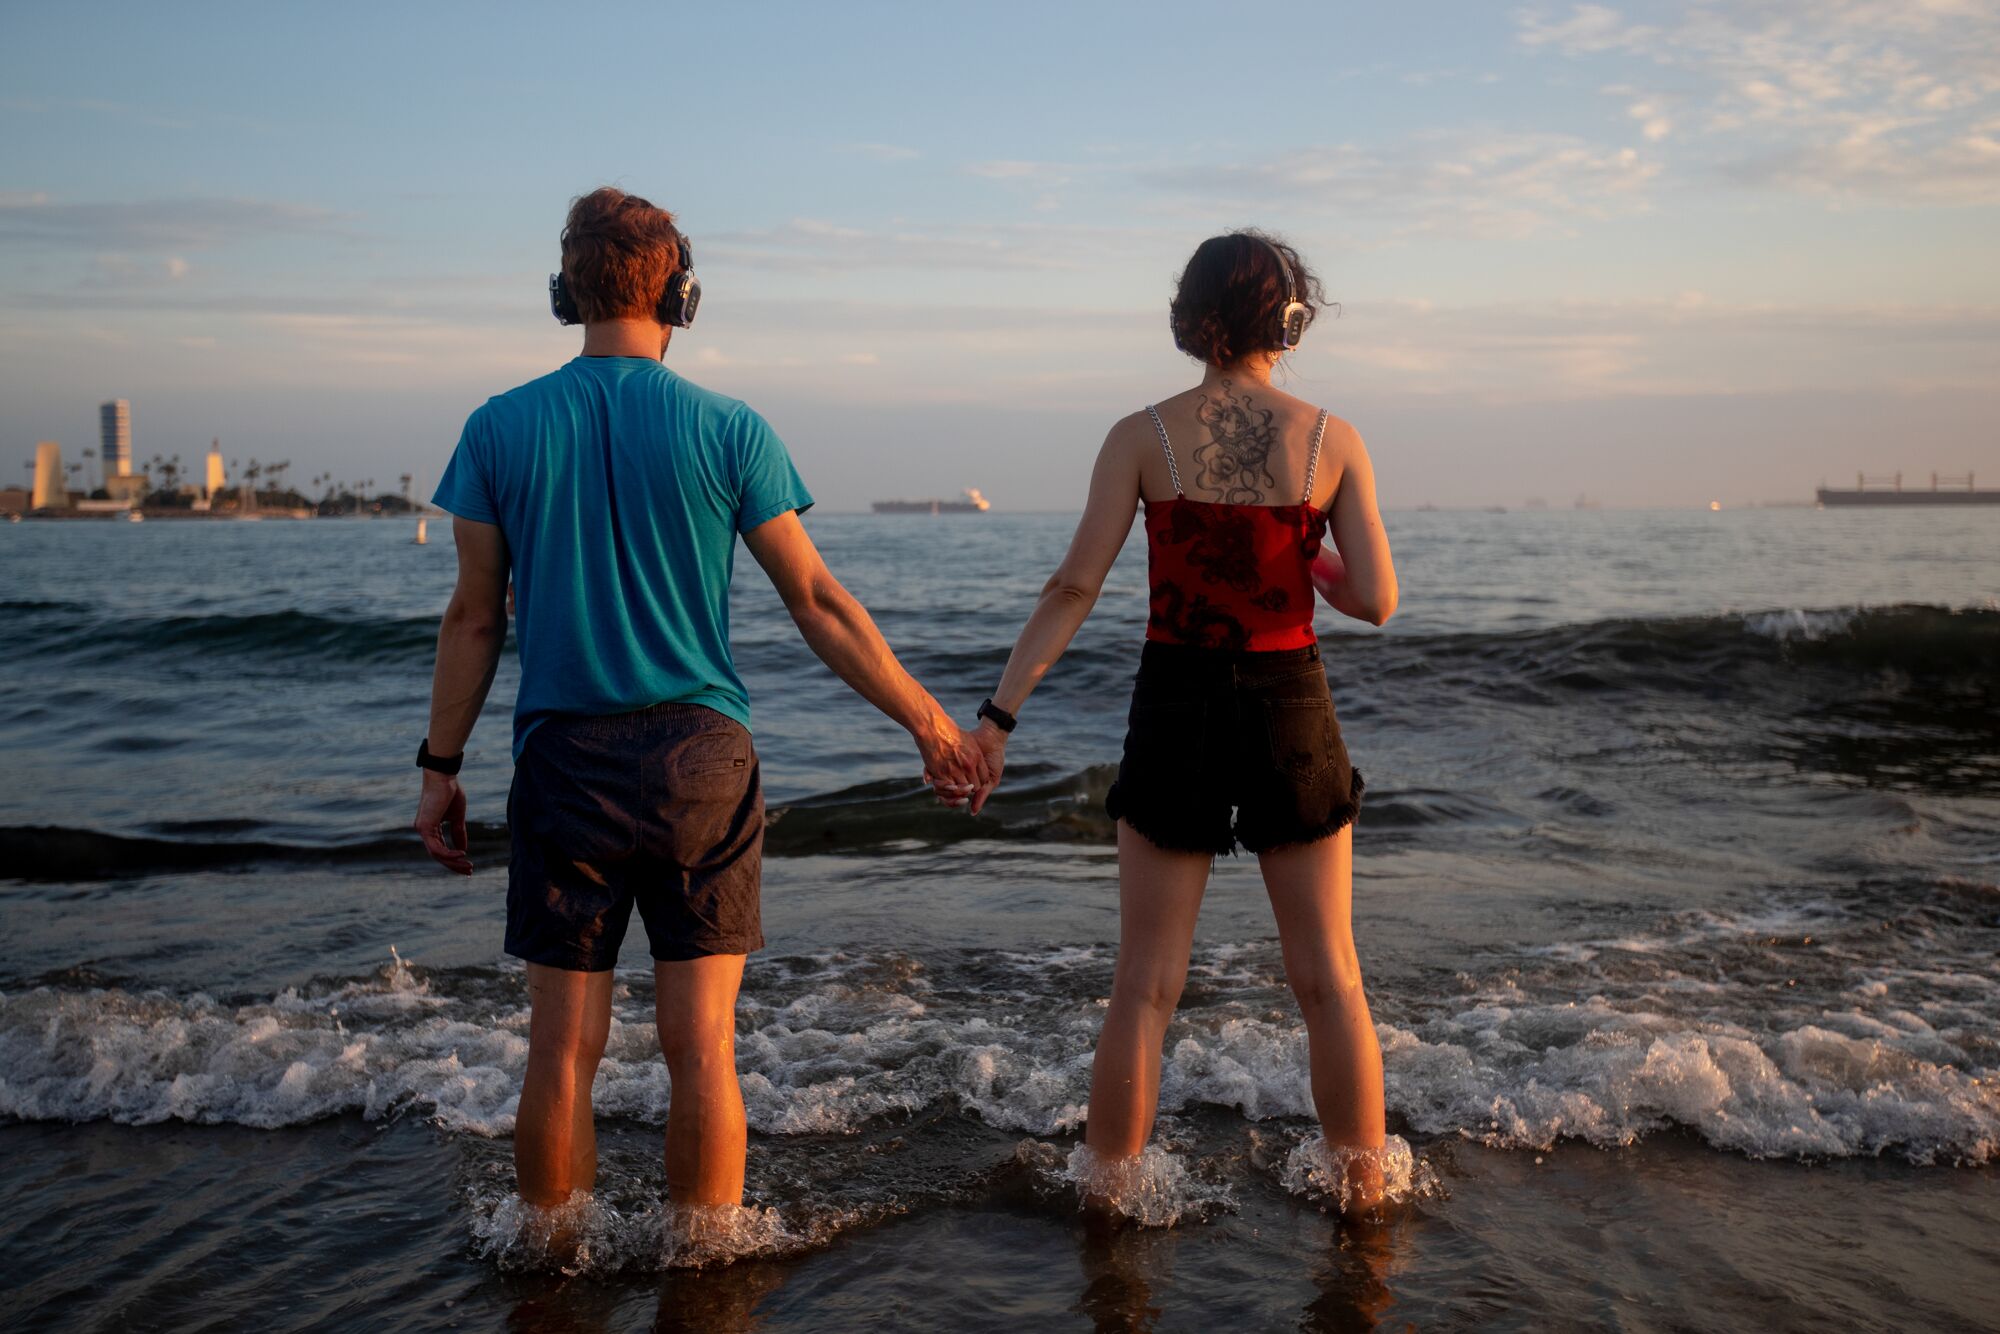 A man and woman standing with their feet in the surf, holding hands and looking out onto the ocean.